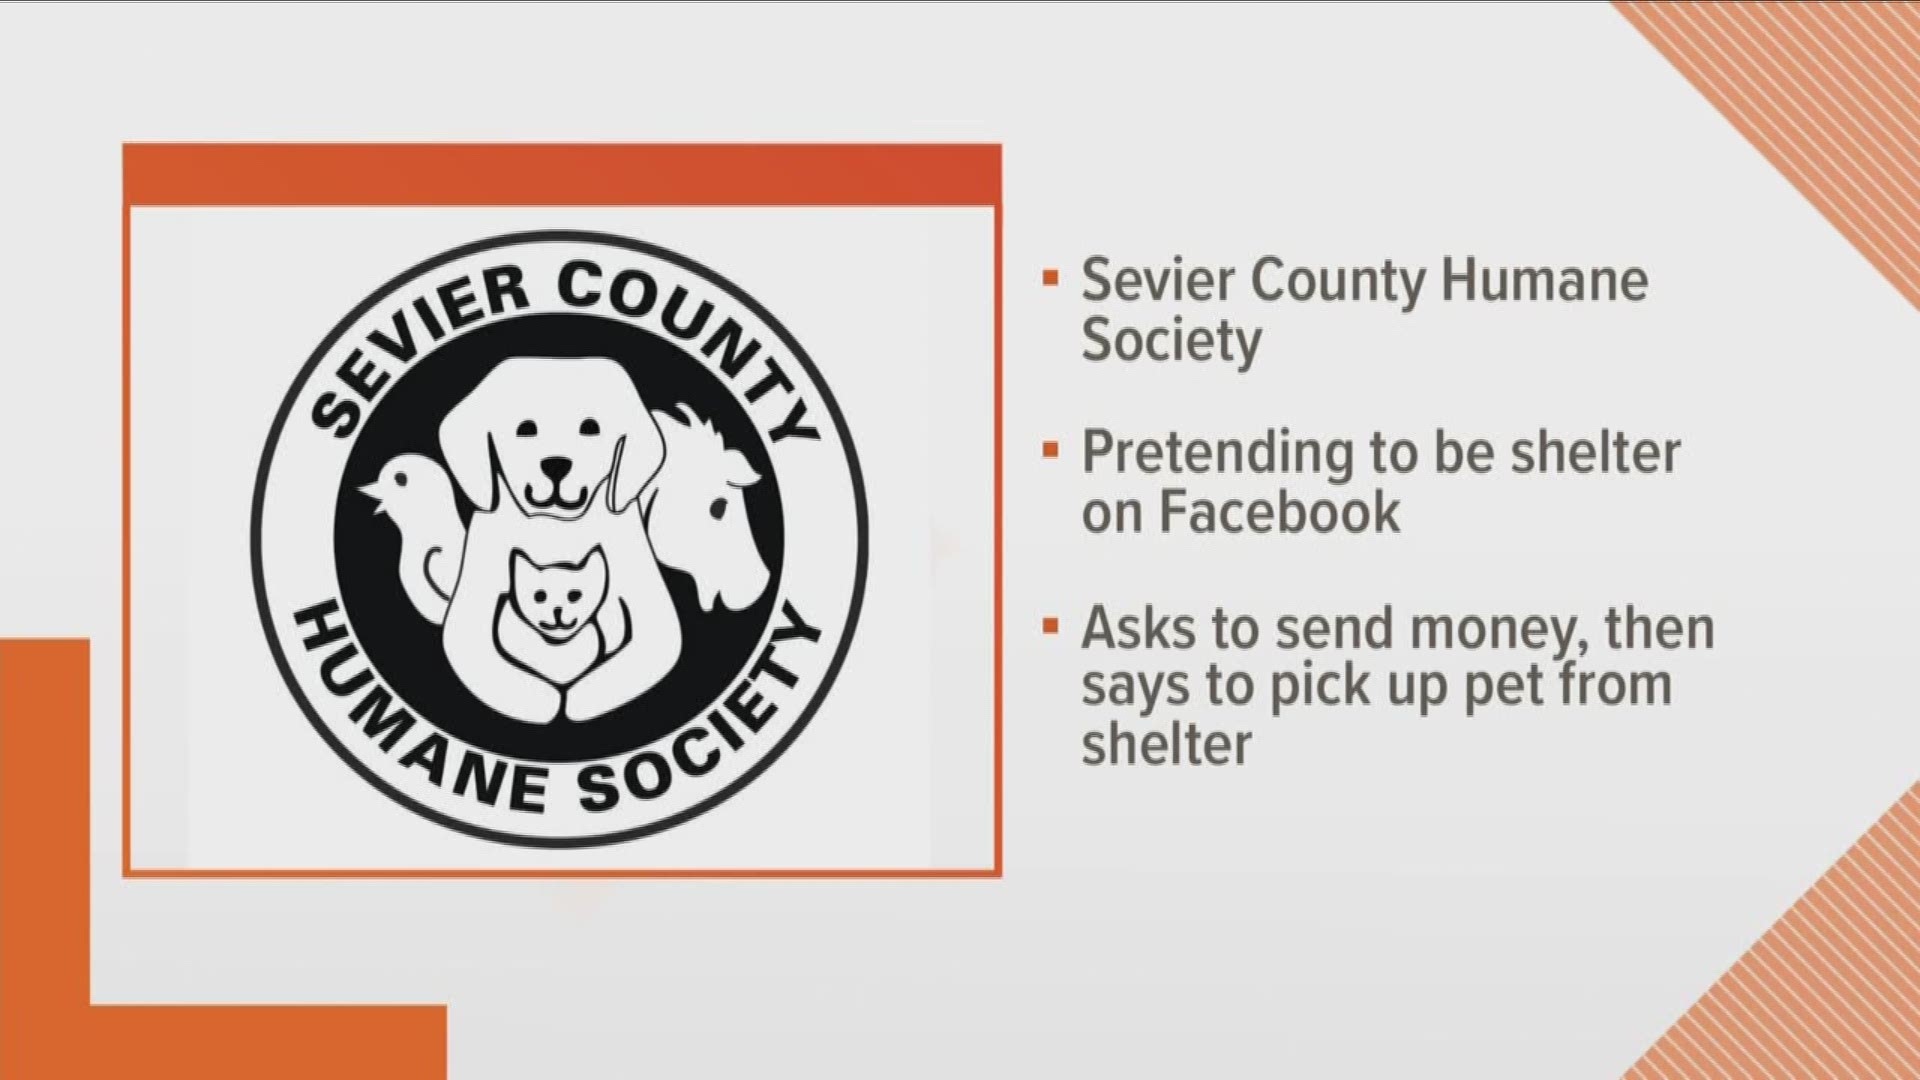 The shelter says the person is asking people to send money upfront for pets then telling them to pick up the animal at the shelter.